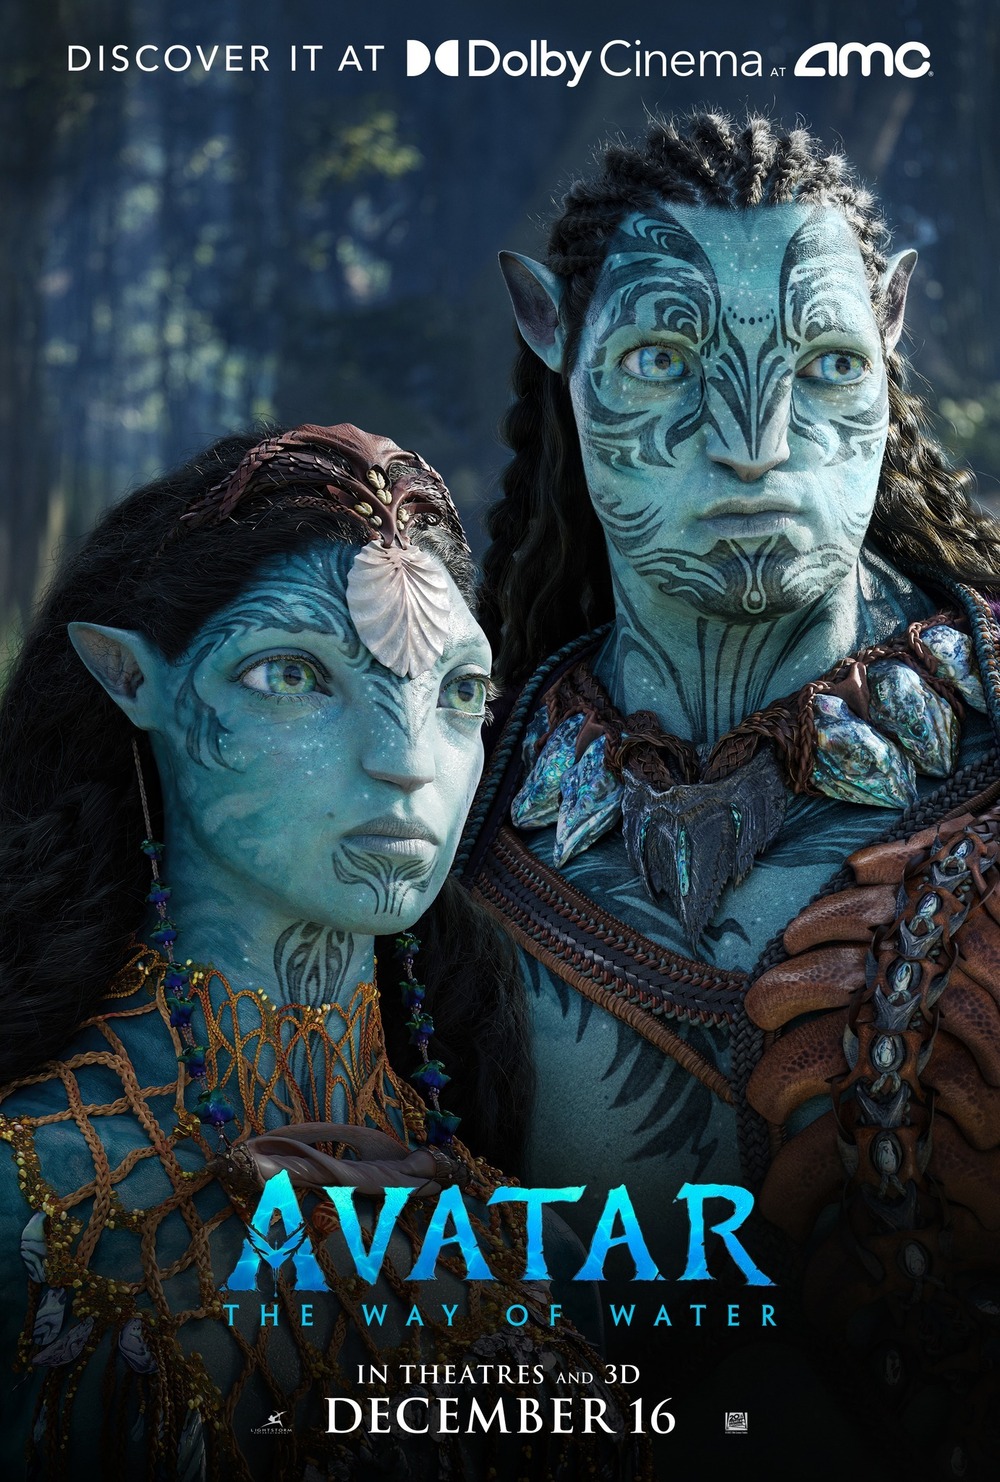 Avatar 2 Finally Has Title and Release Date  NERD NIGHT NEWS